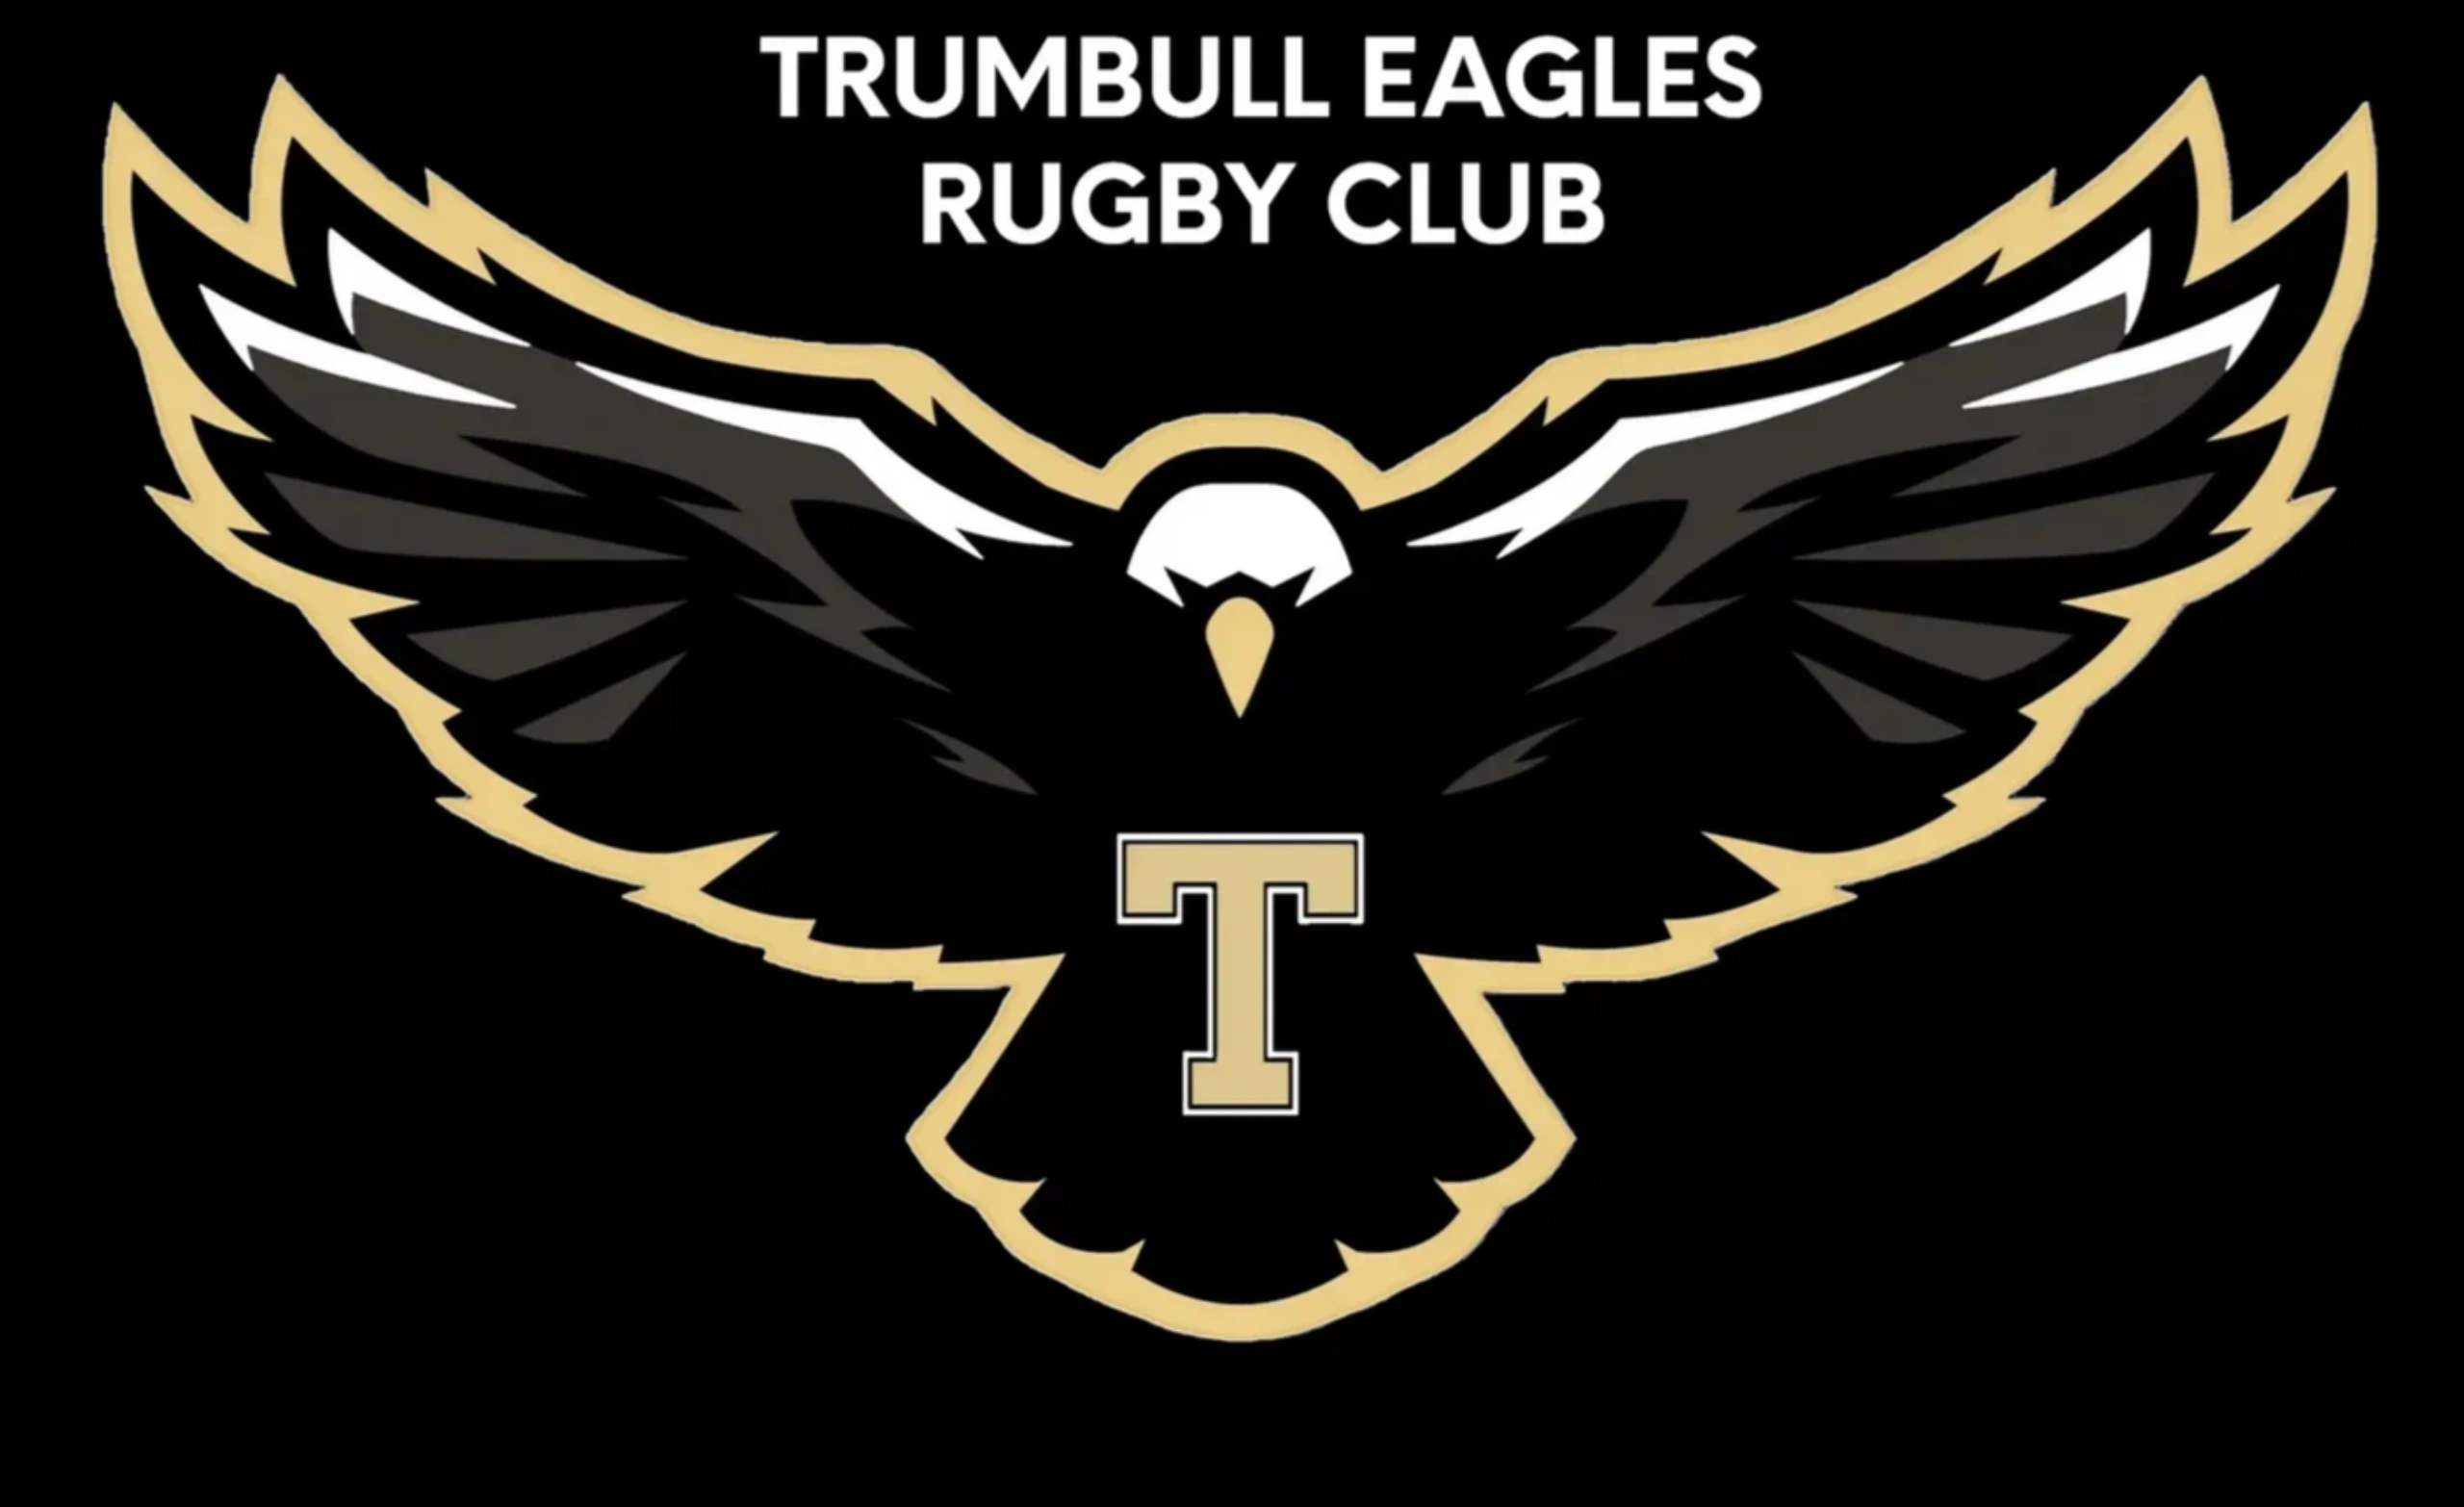 Trumbull Eagles Rugby